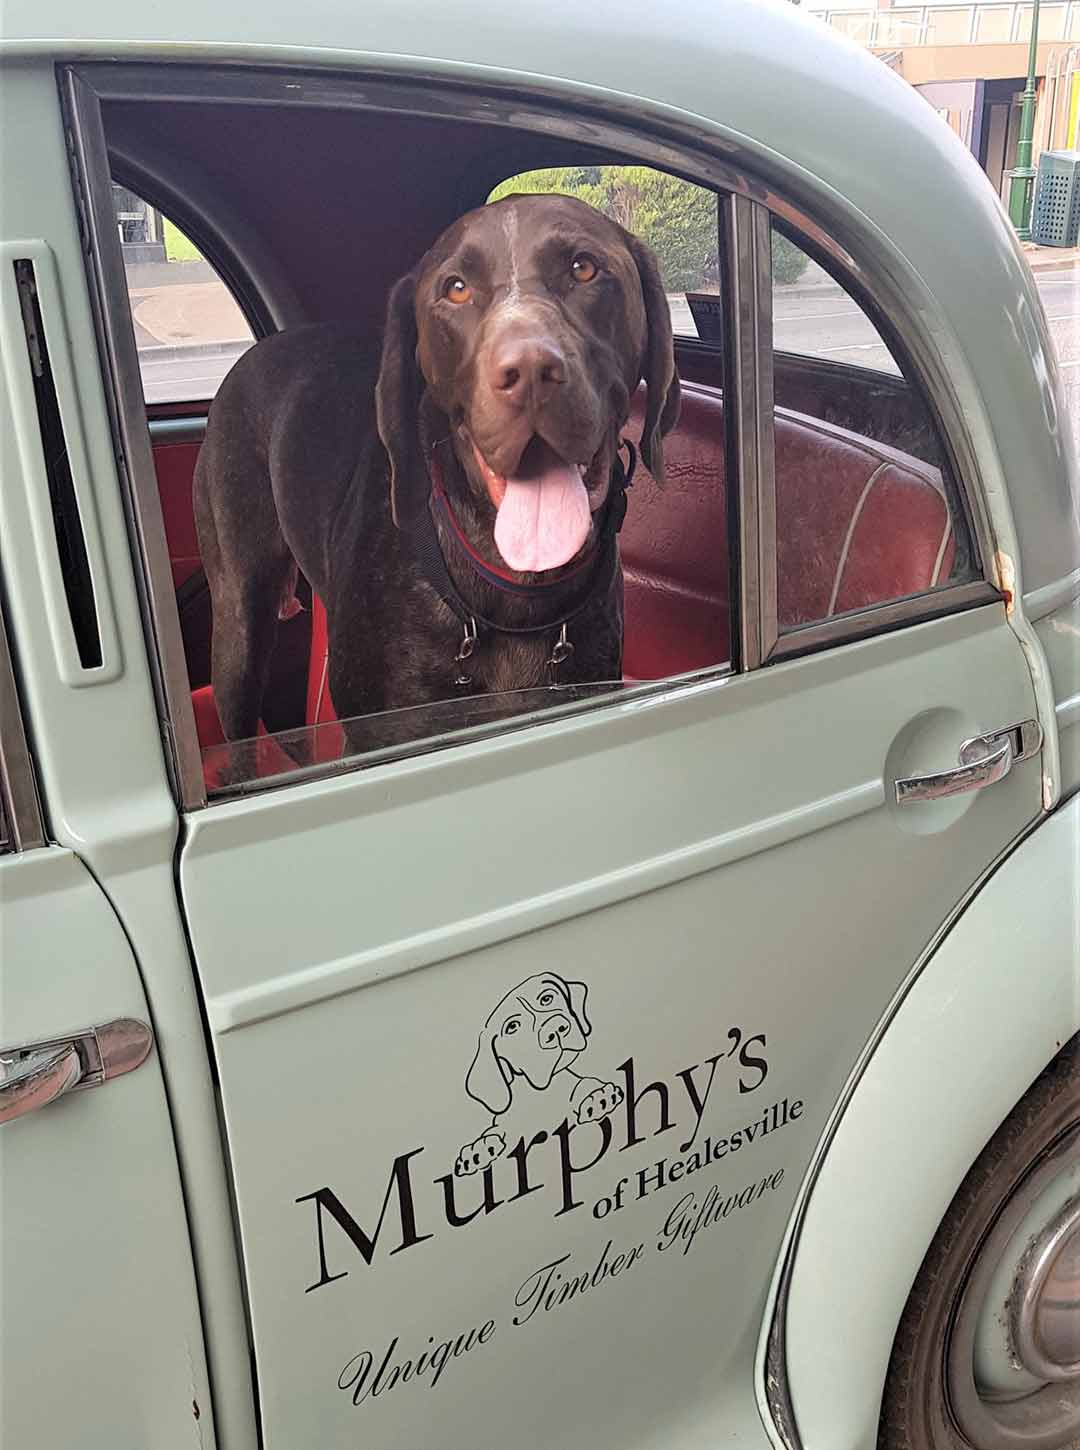 Murphy the dog, the inspiration for the business name of Murphy's of Healesville.